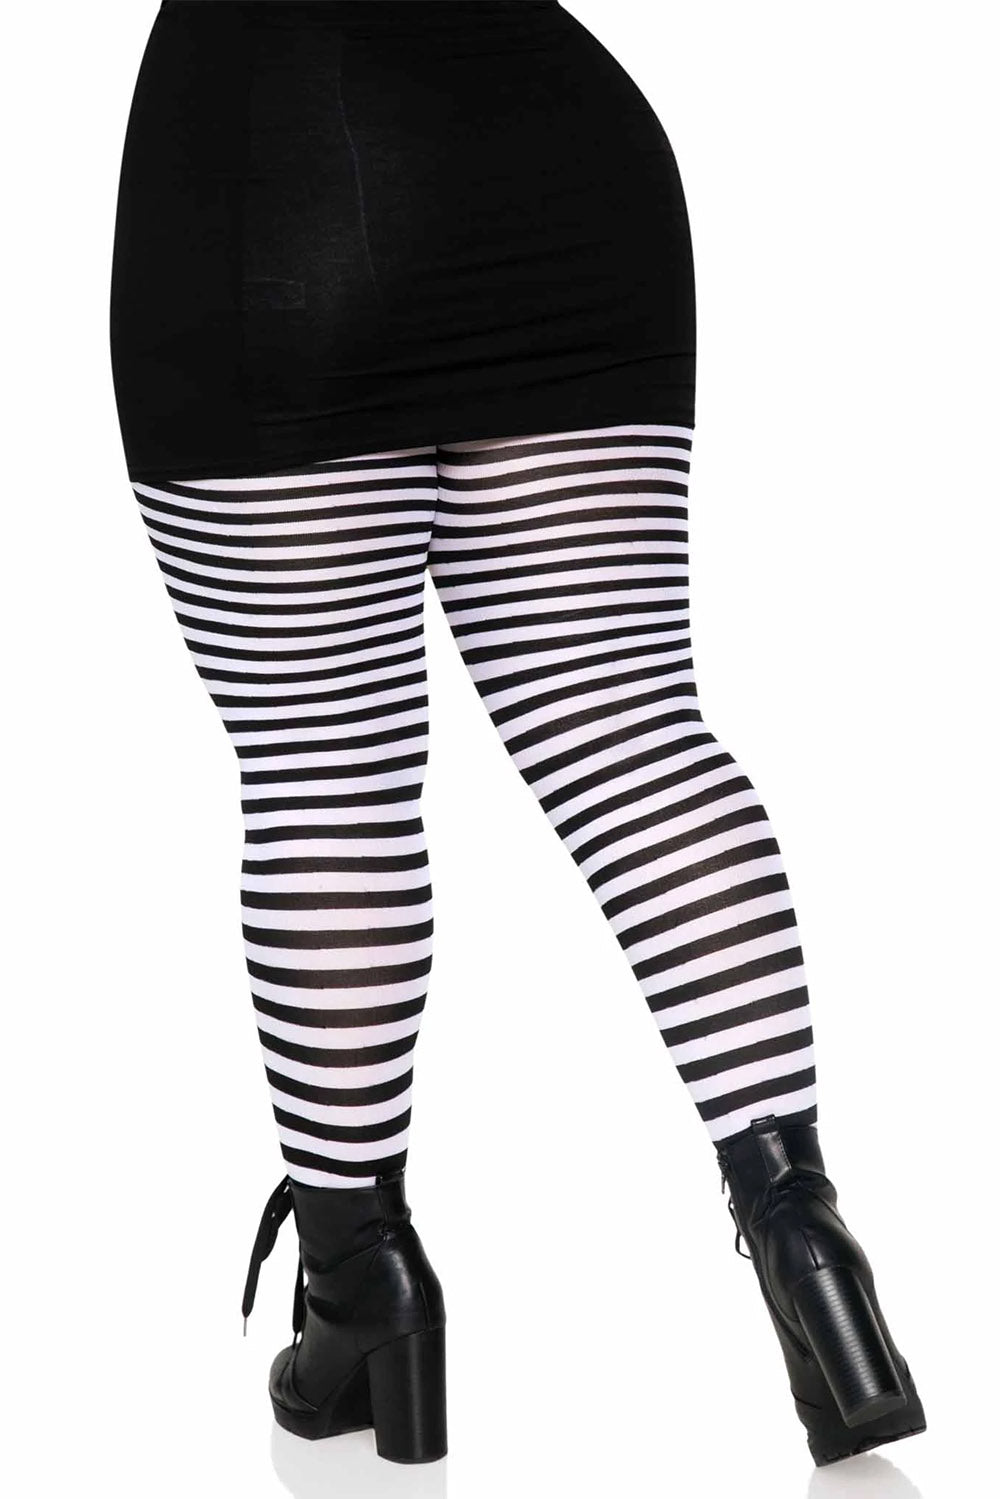 Adult White Tights Plus Size